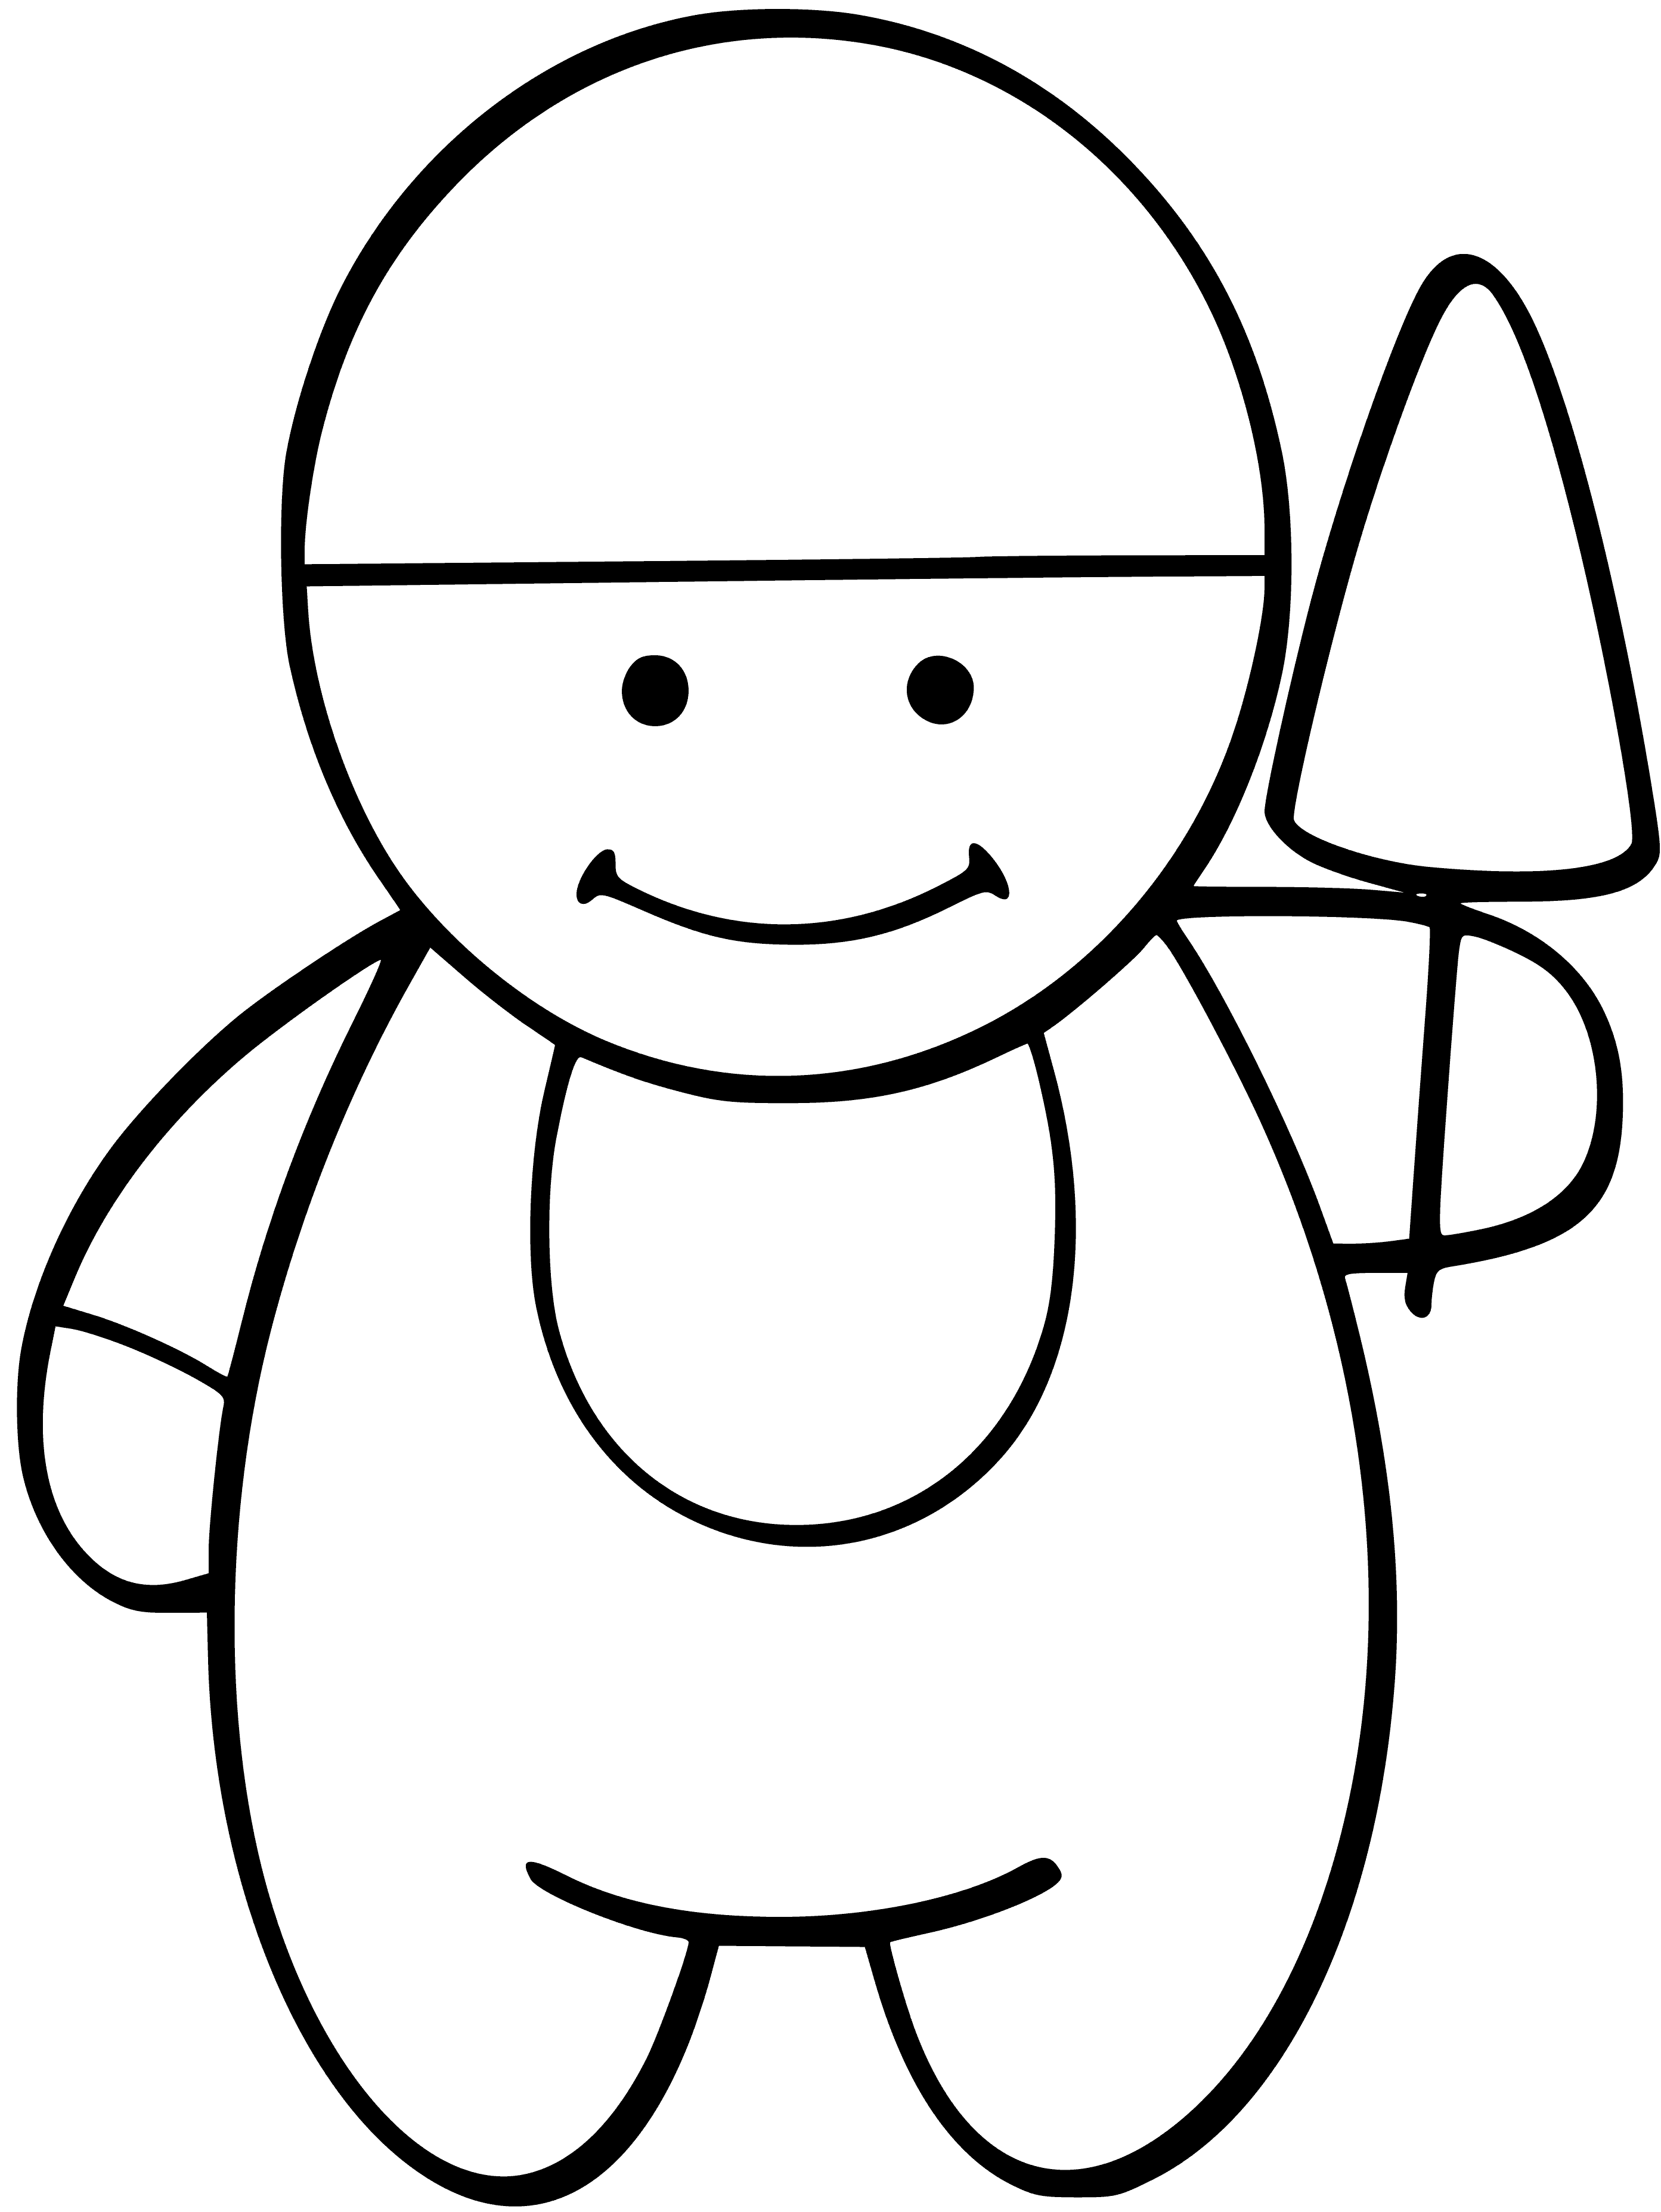 Builder coloring page